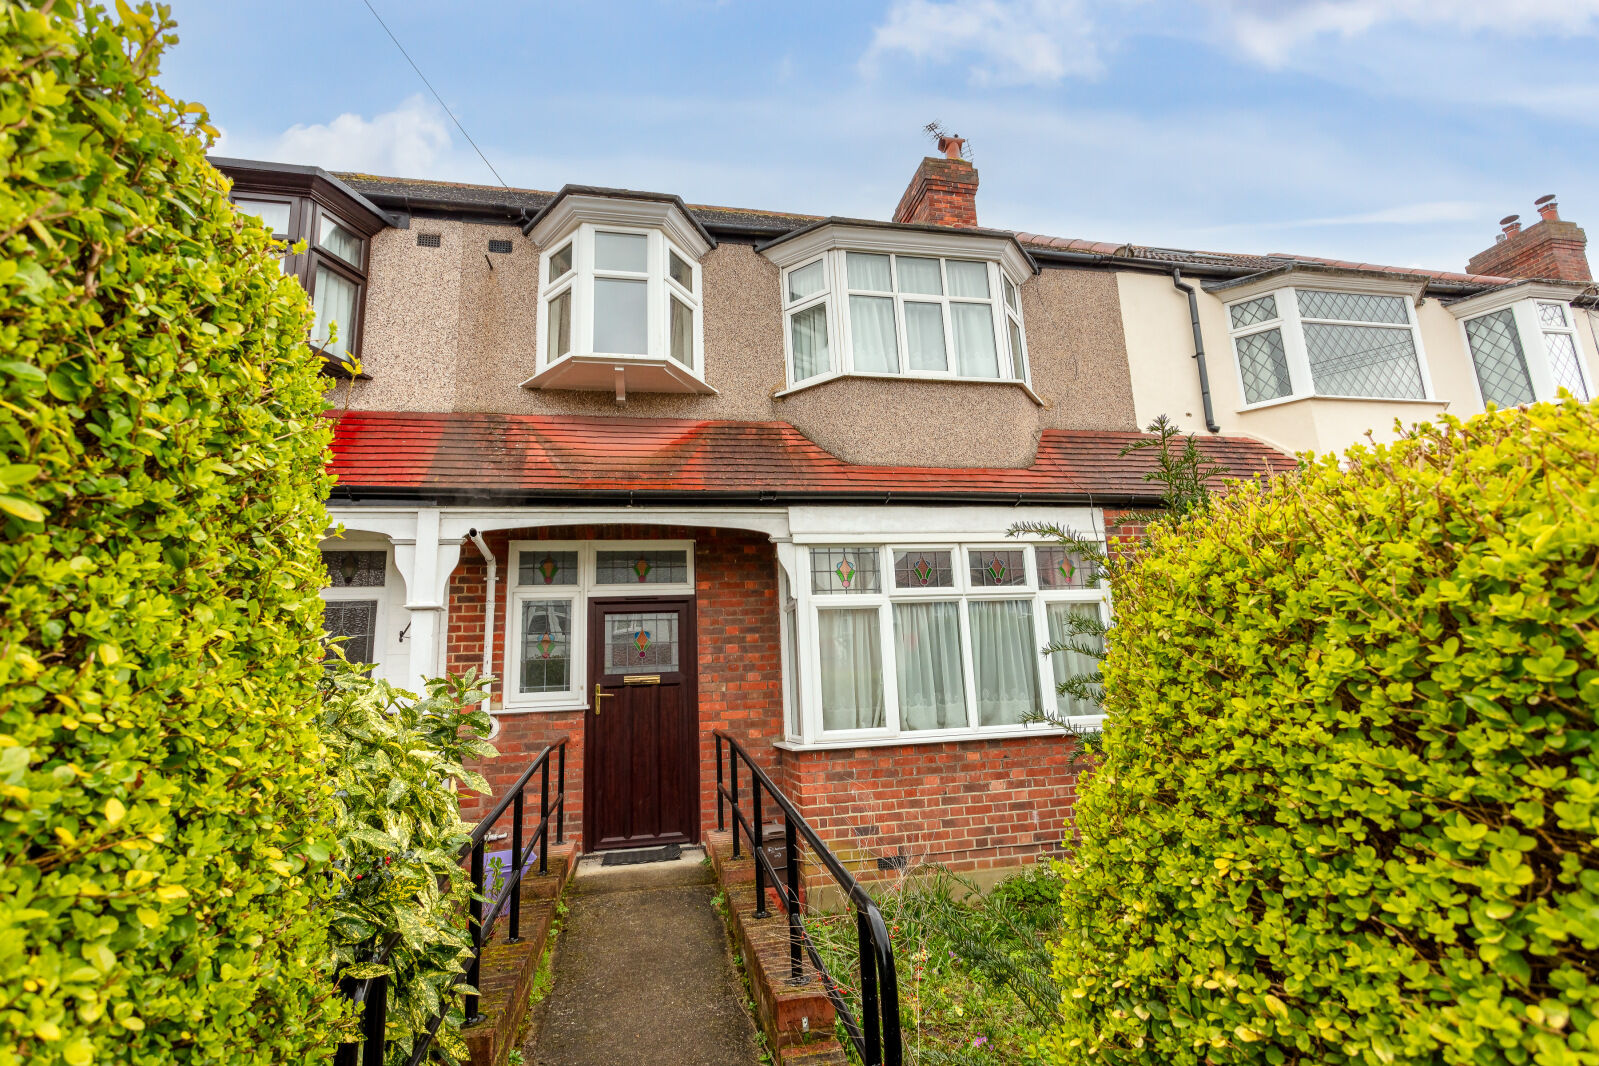 3 bedroom mid terraced house for sale Northway, Morden, SM4, main image